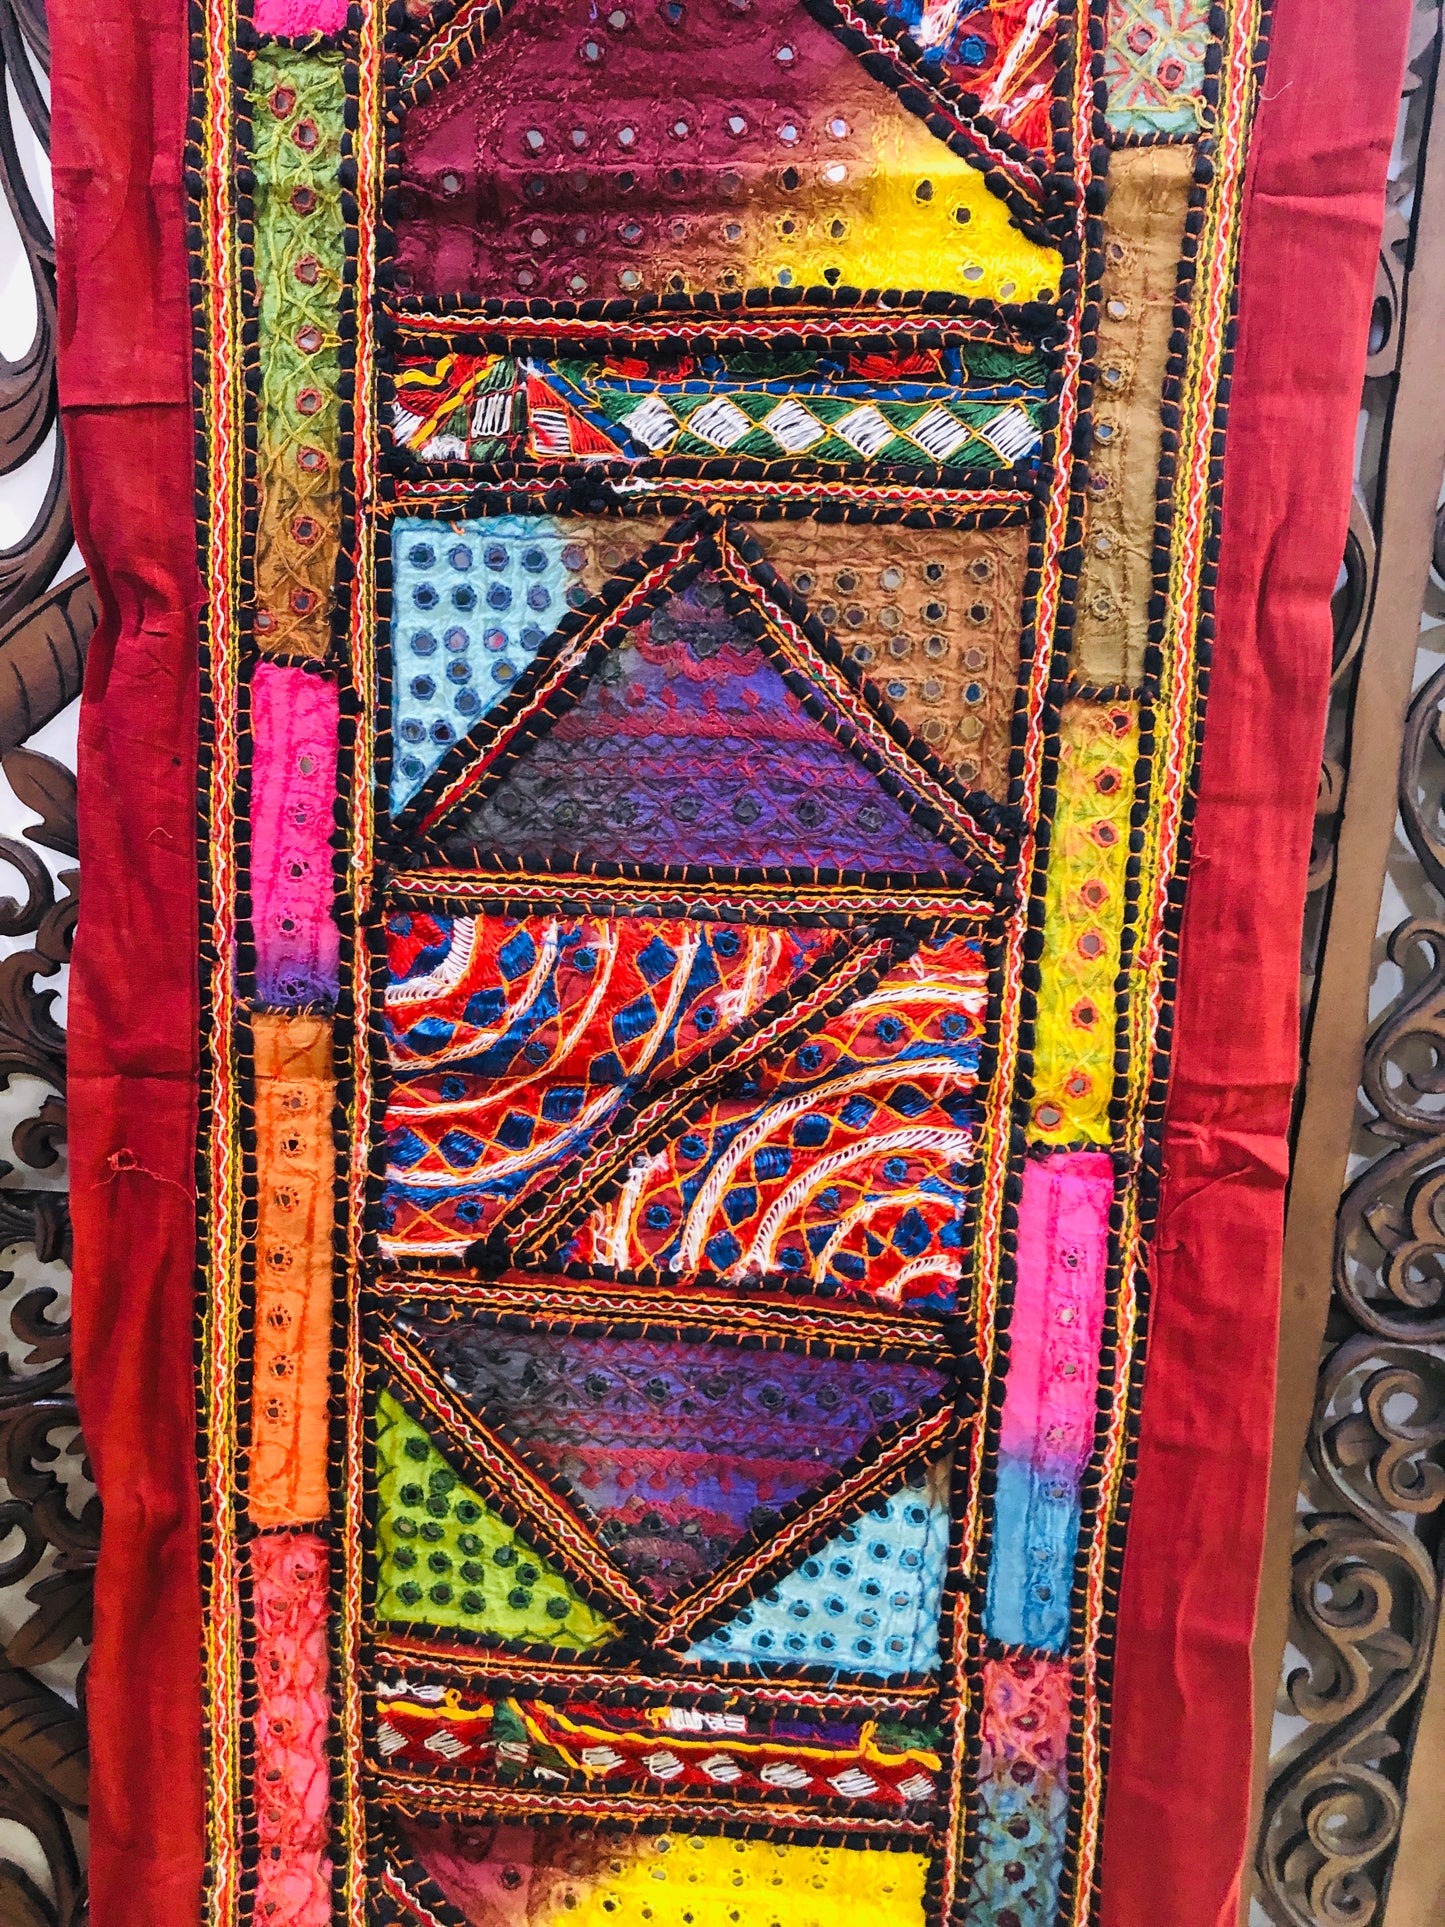 Rajasthani Embroidered Wall Hangings 22" x 62"